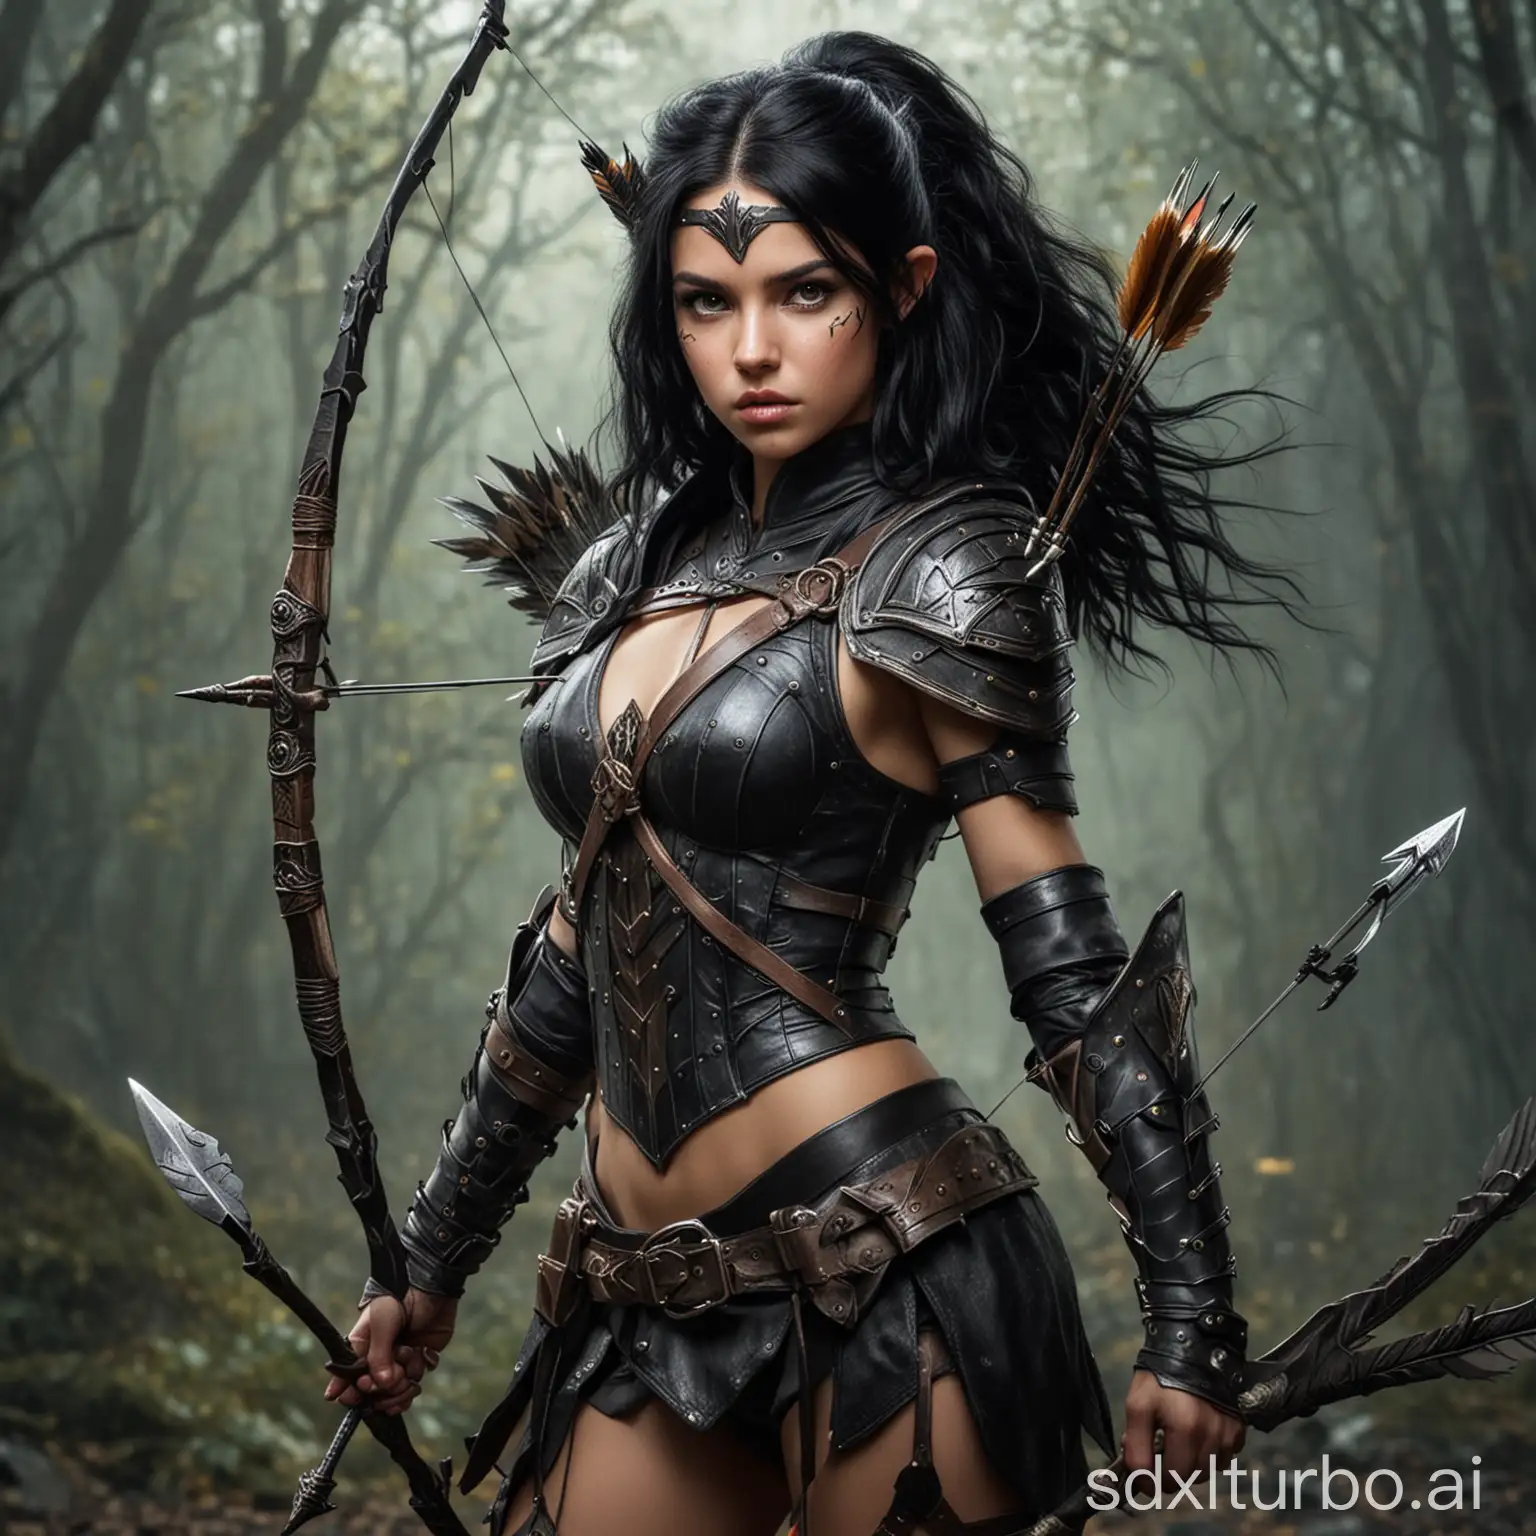 Fantasy young Huntress with arrow and bow with black hair and a warrior in armor with spear as weapon as team